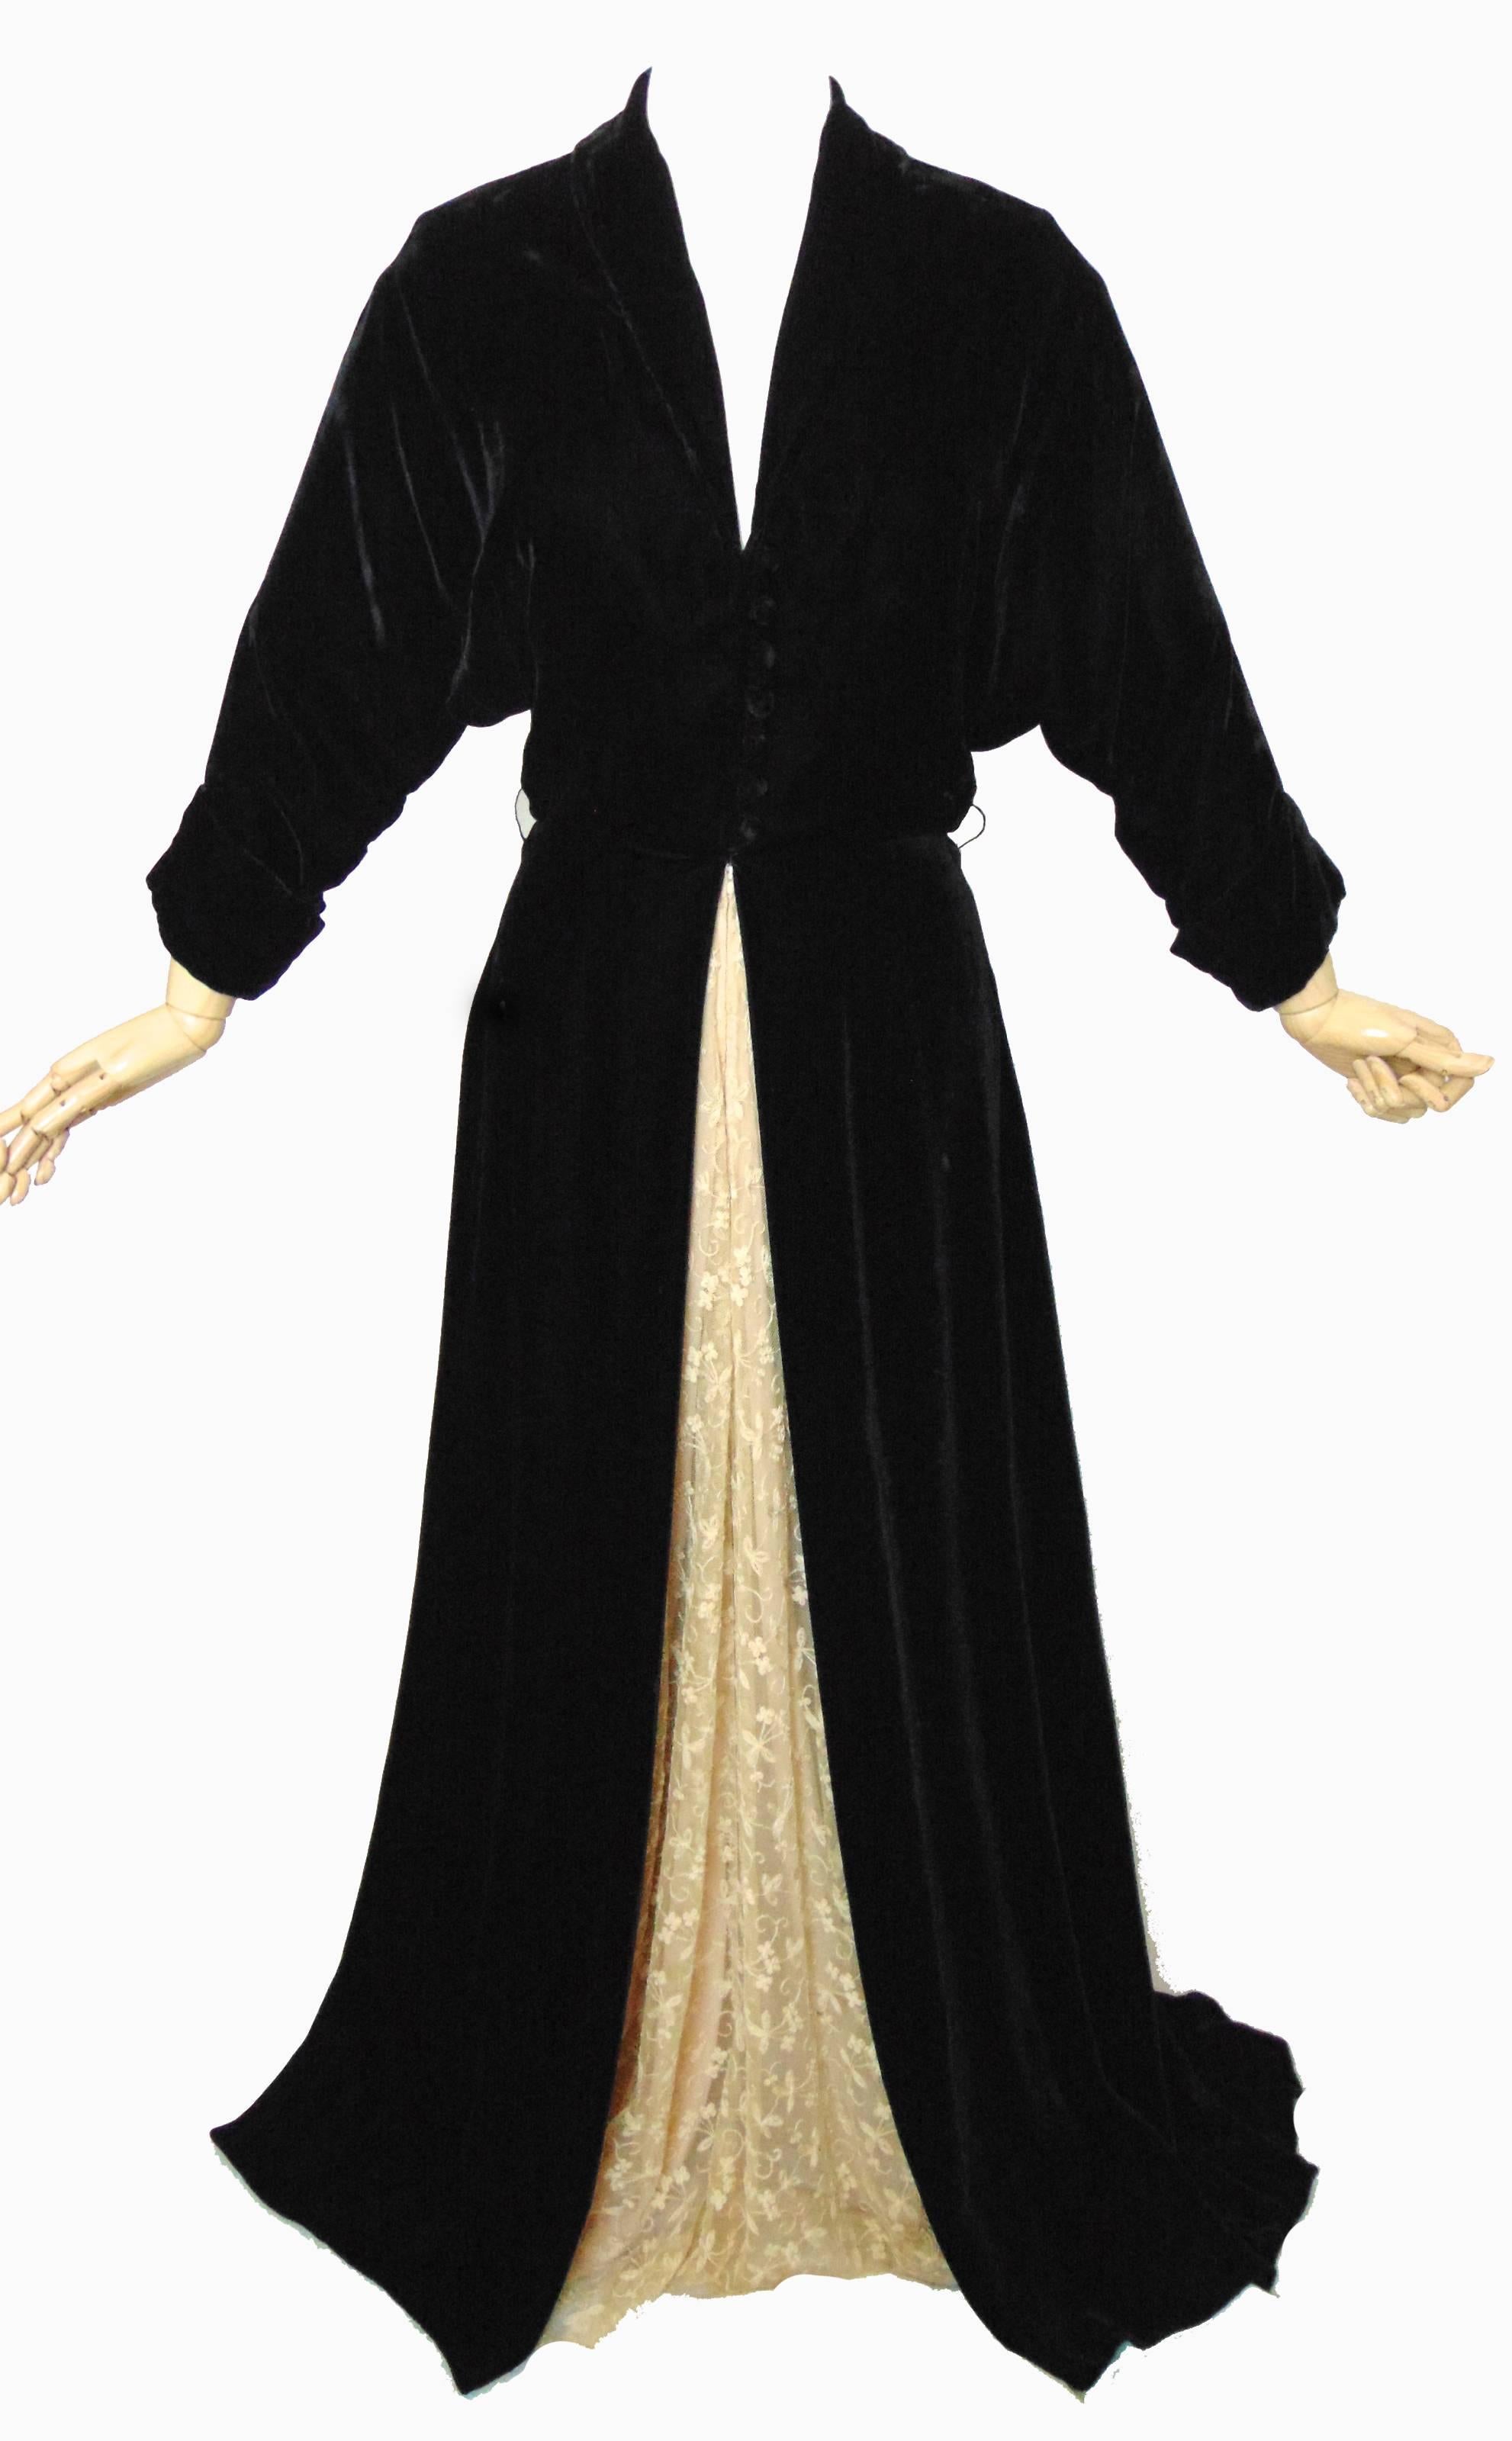 This formal evening gown is labeled Henri Bendel and was likely manufactured sometime in the 1940s.   Henri Bendel was an upscale retailer which opened in Greenich Village in 1895 and was one of the first retailers to sell Coco Chanel designs in the